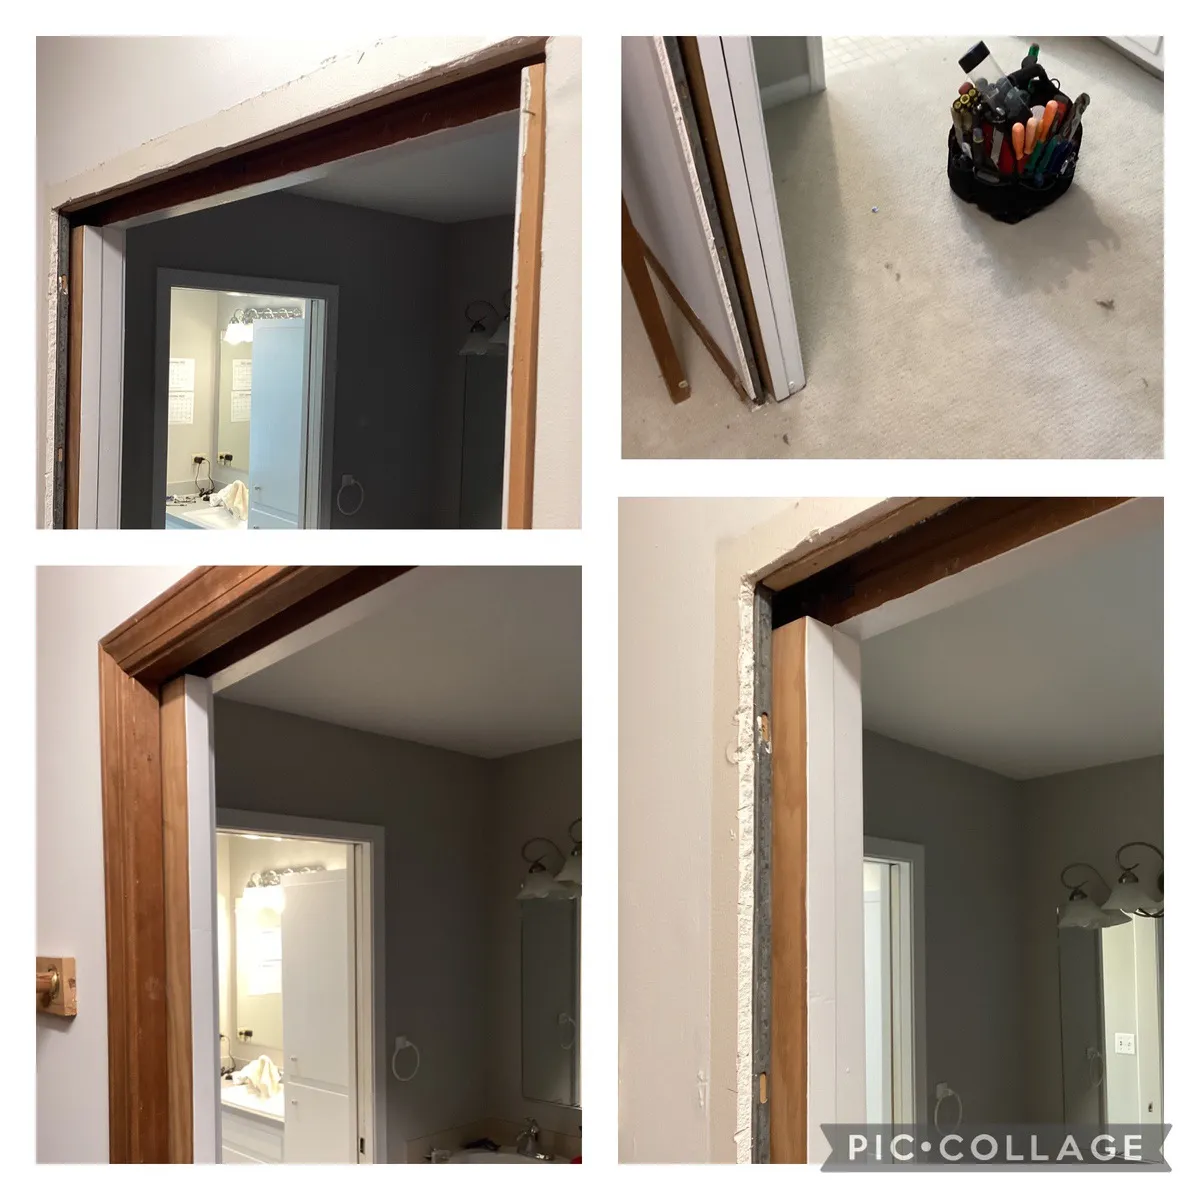 Mr. Handyman installed a brand-new door frame during a trim replacement service for a client’s bathroom